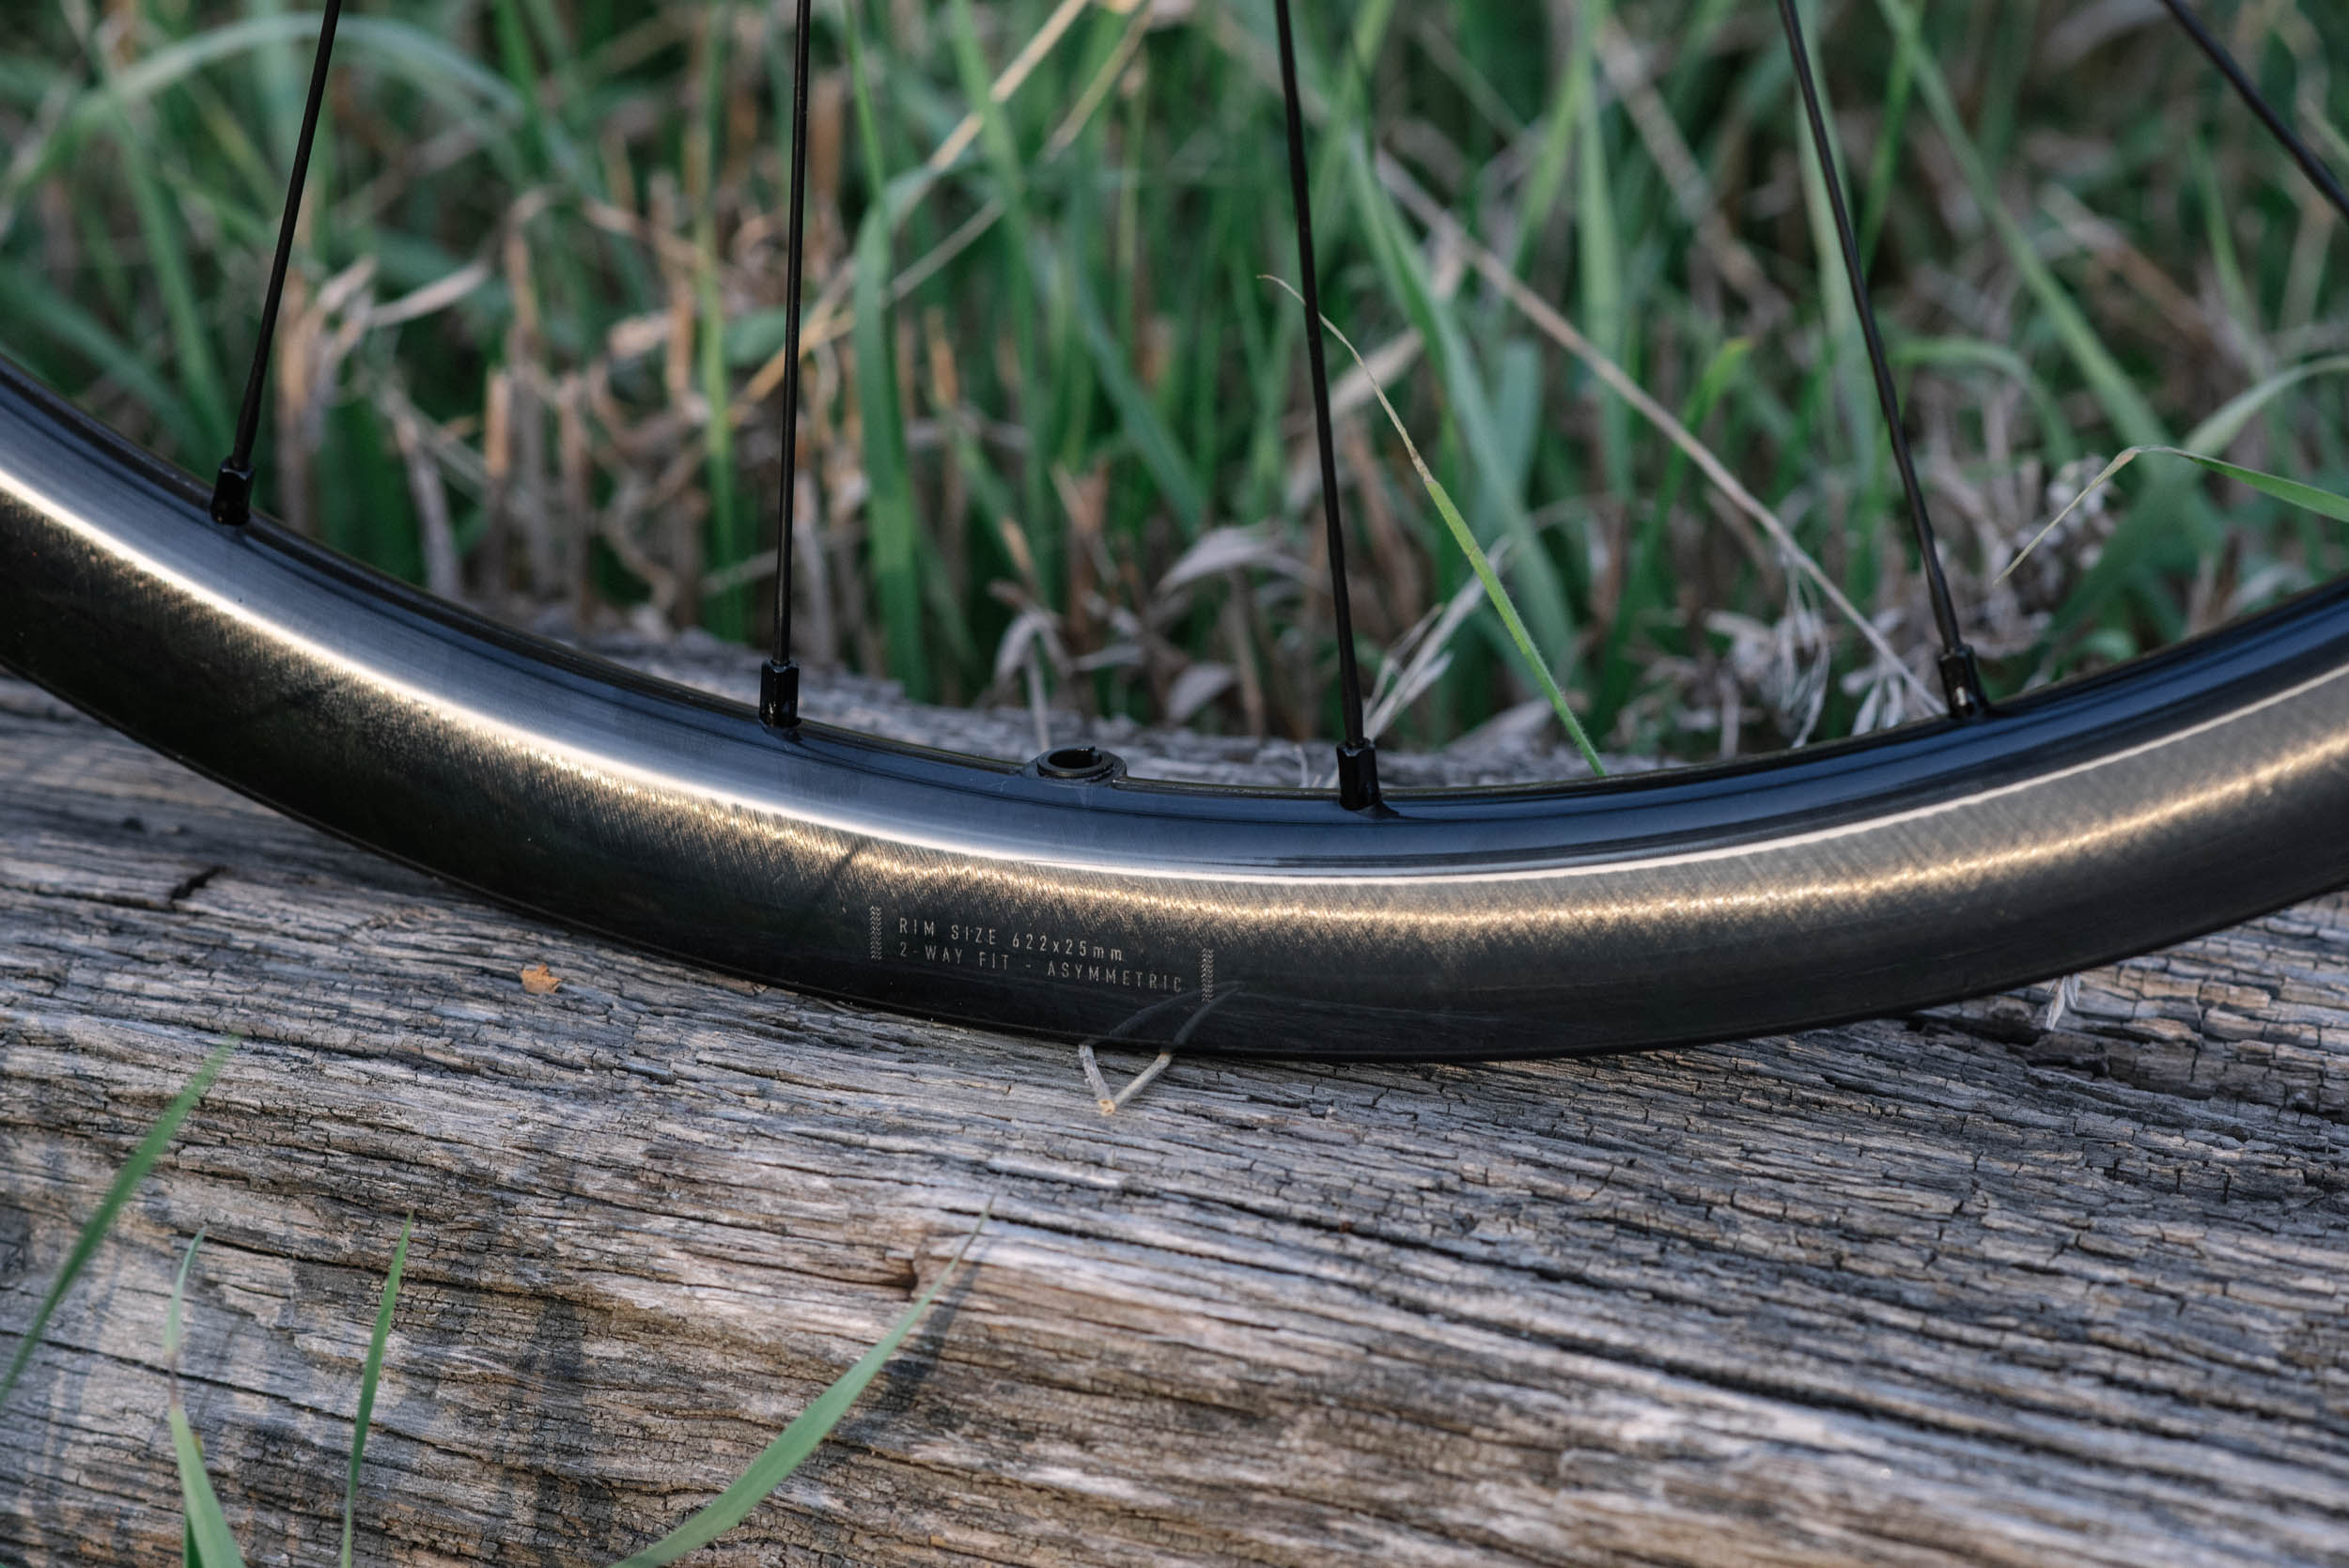 New Campagnolo Levante Wheels: Ride (Gravel) Like the Wind